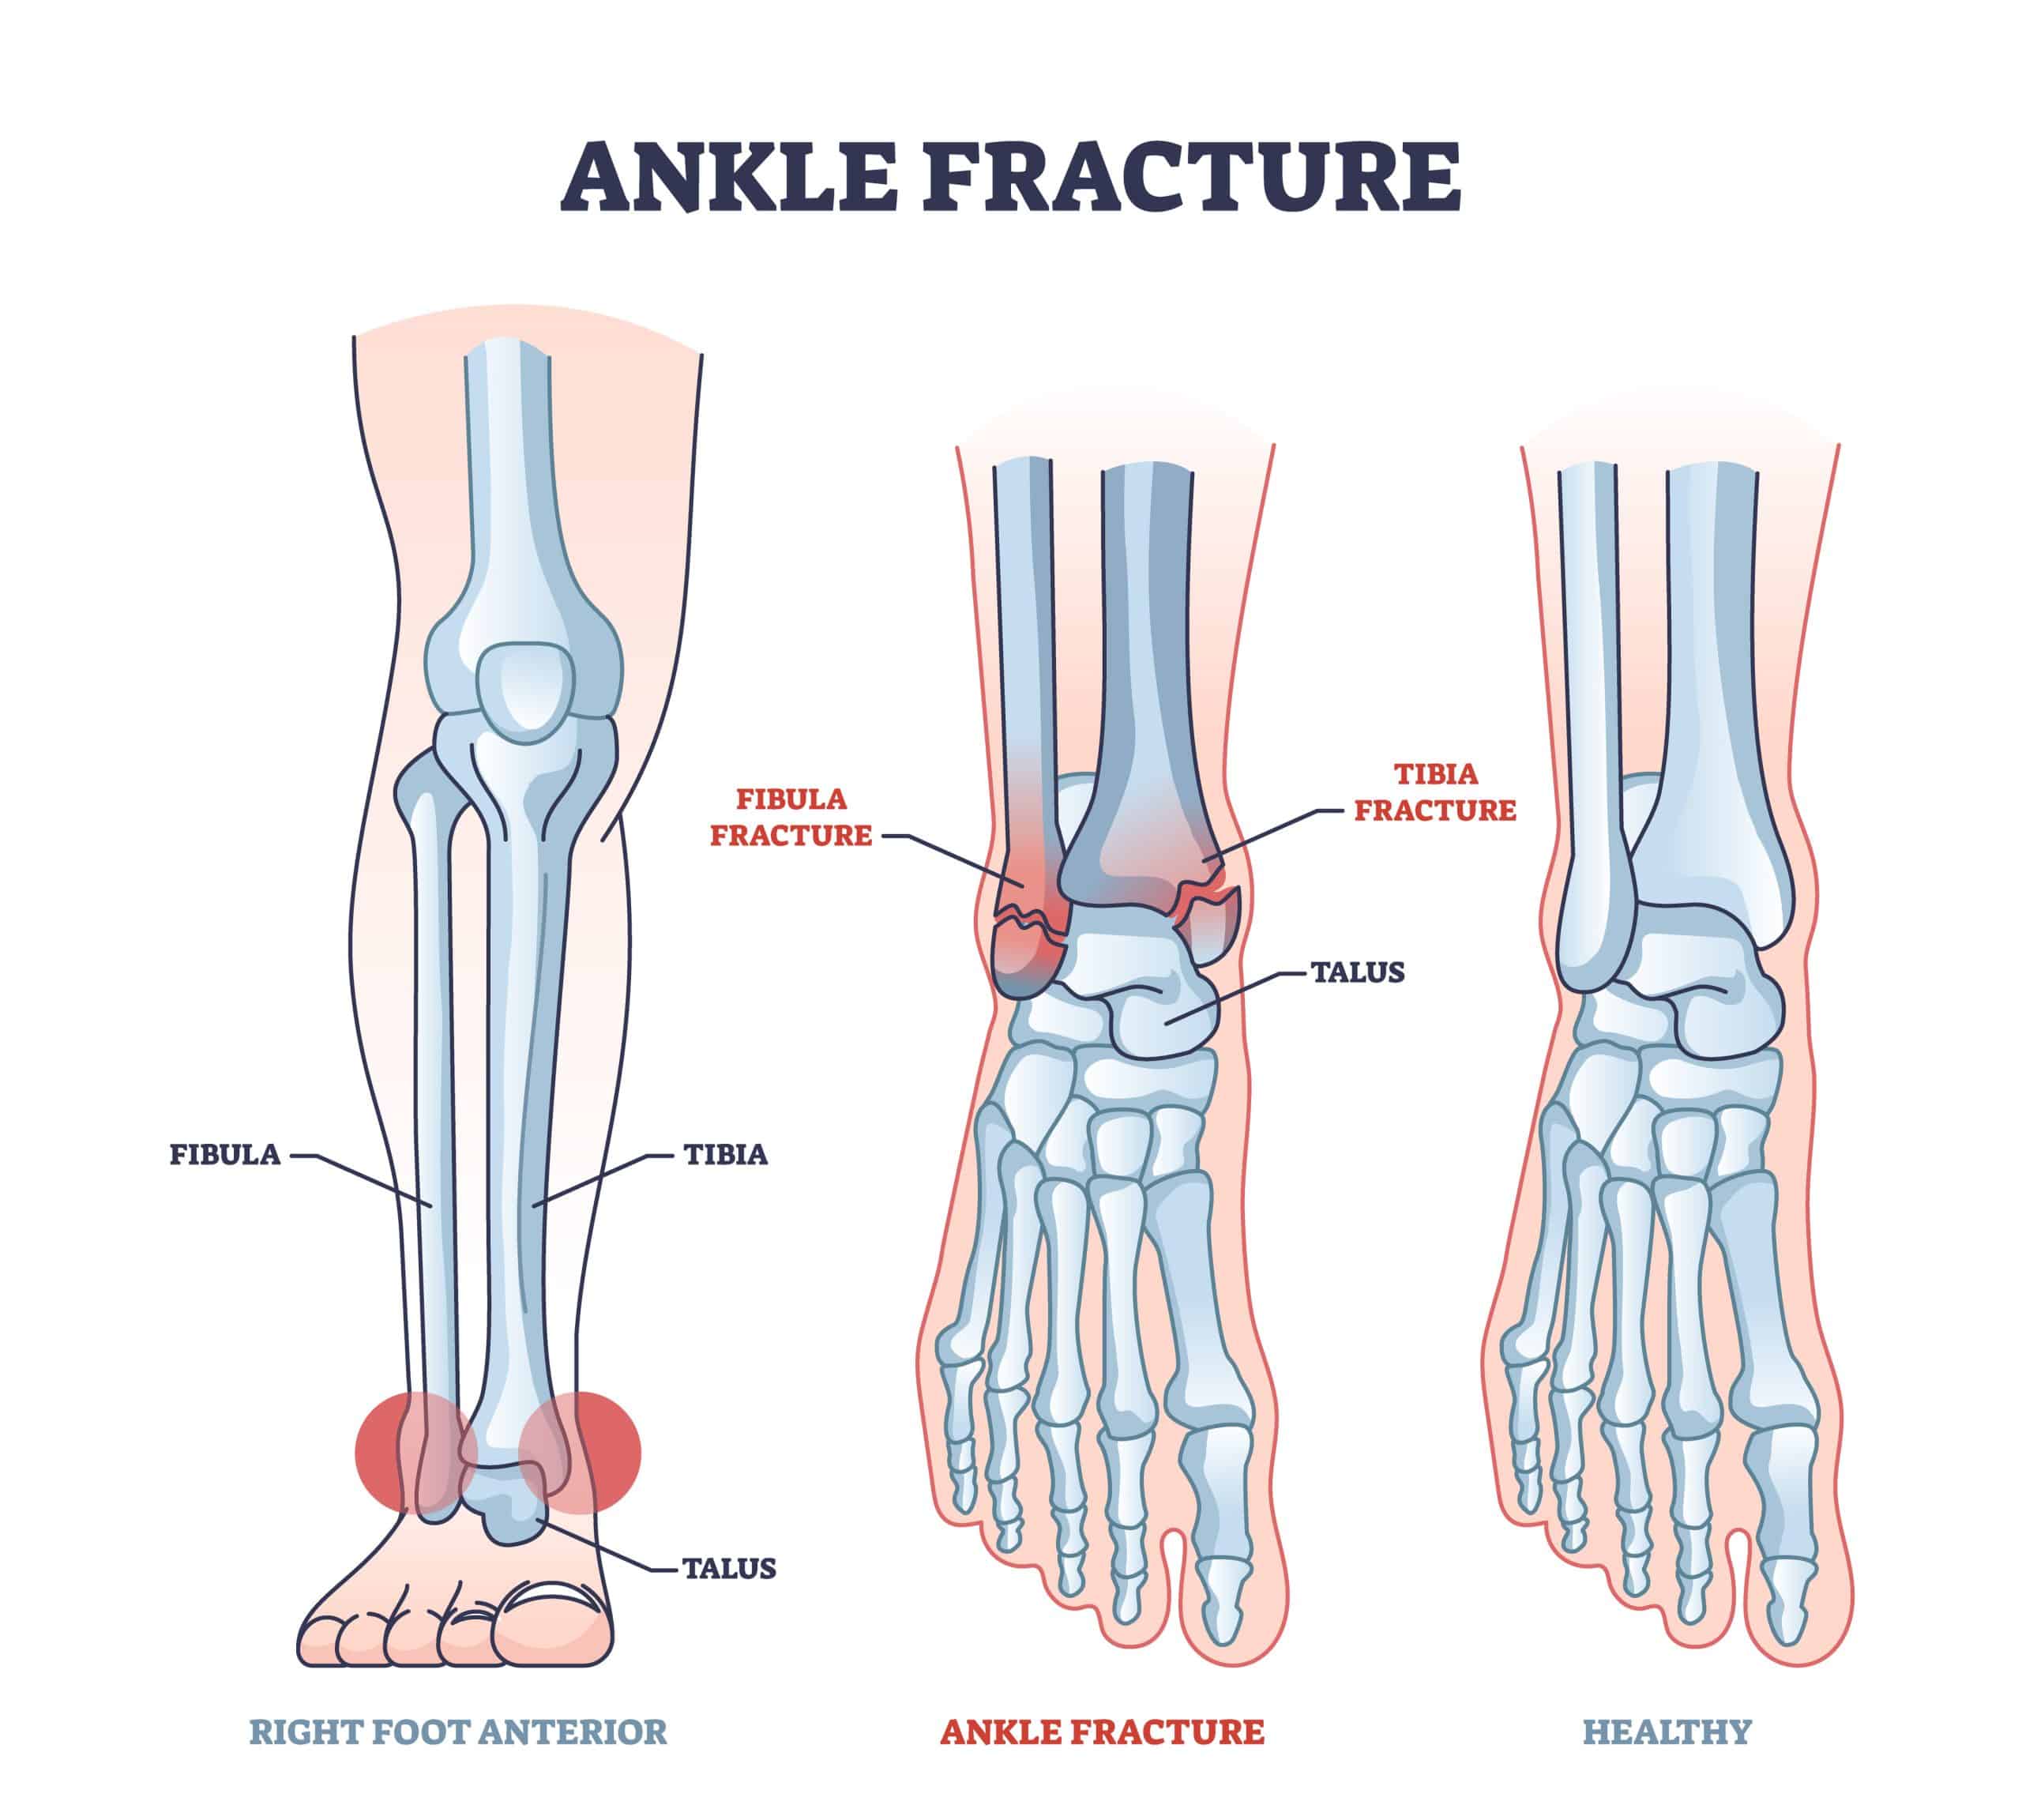 What Are the Symptoms of a Broken Ankle?